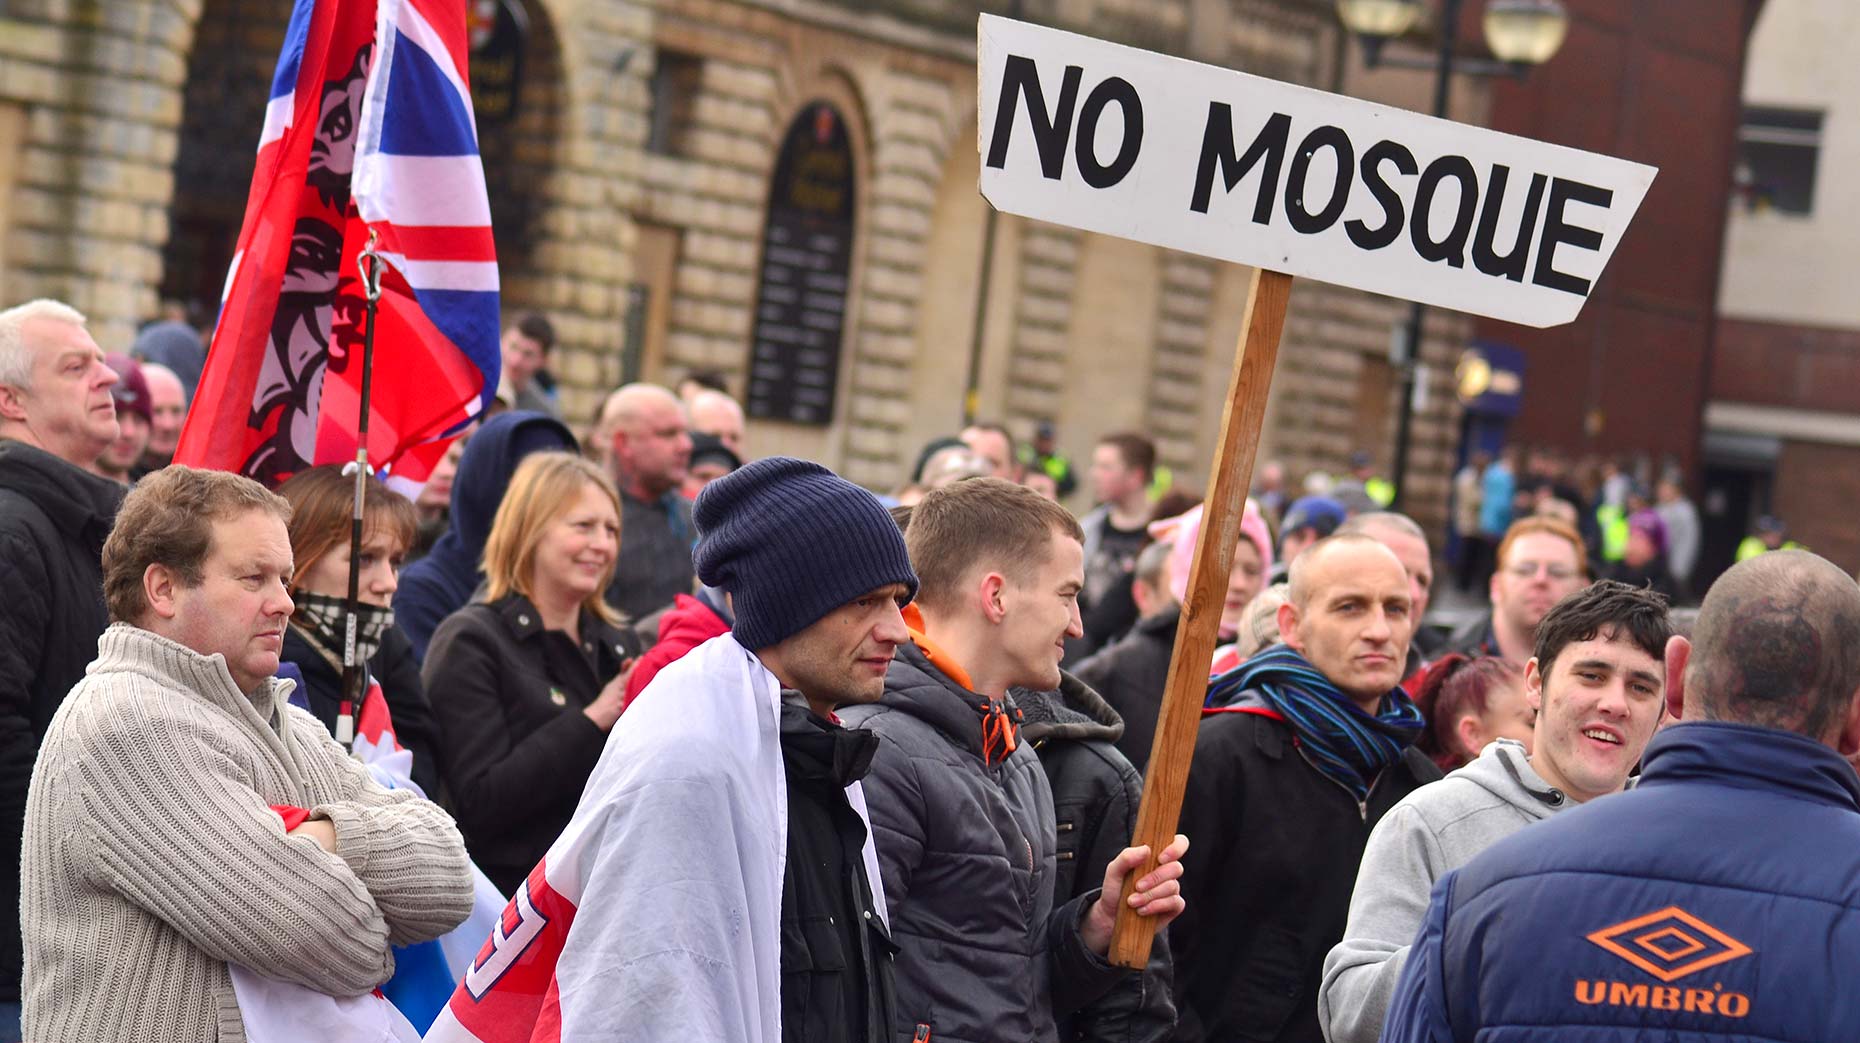 Supporters at the anti-mosque protest in 2014. Photo: Steve Smailes for The Lincolnite